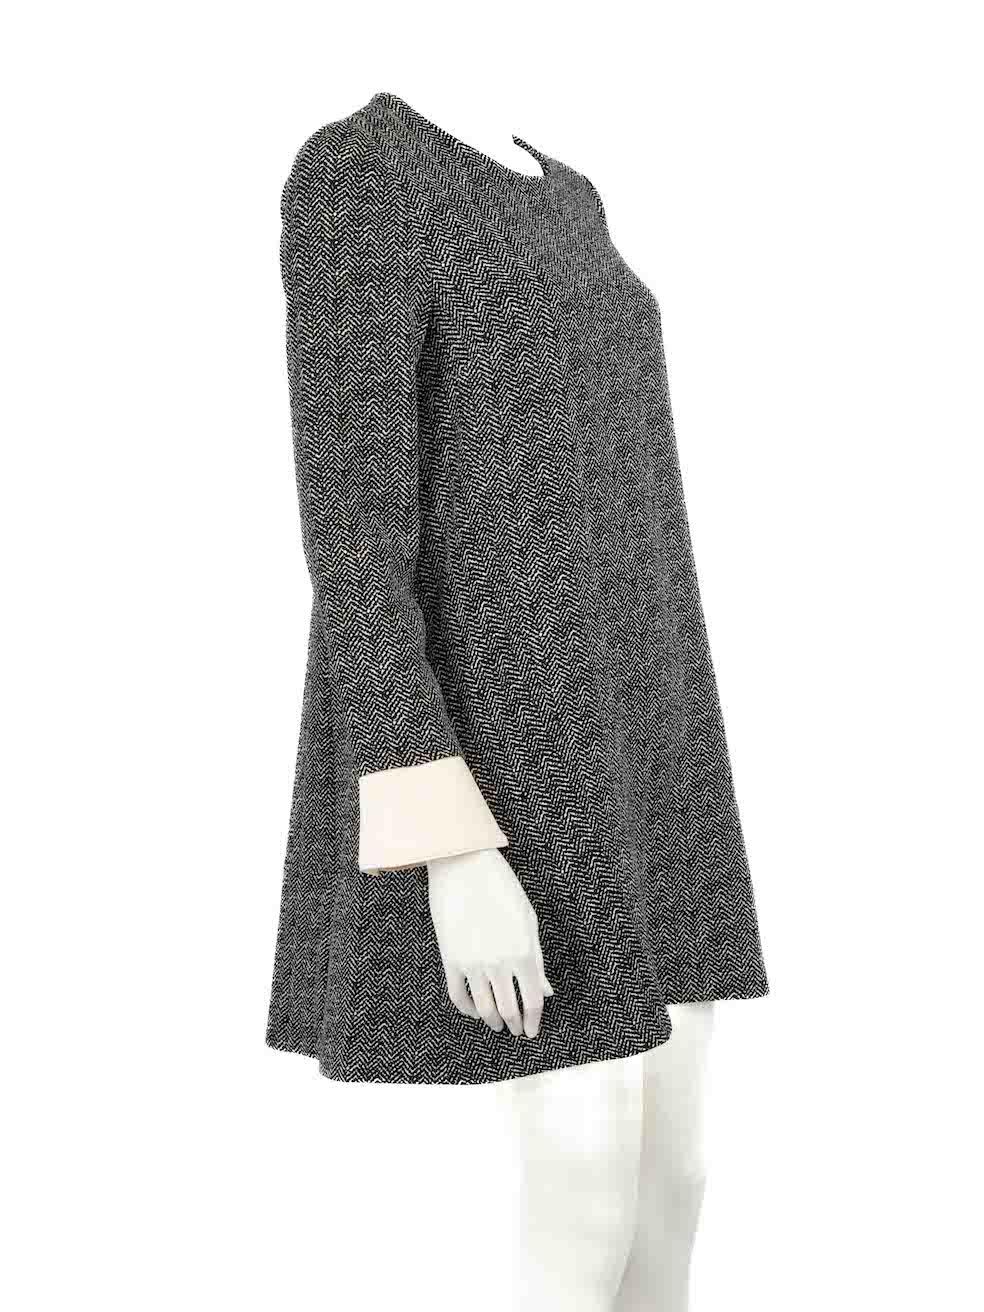 CONDITION is Very good. Hardly any visible wear to dress is evident on this used Essentiel Antwerp designer resale item.
 
 
 
 Details
 
 
 Black
 
 Polyester
 
 Dress
 
 Zigzag pattern
 
 Round neck
 
 Long sleeves
 
 Knee length
 
 2x Side